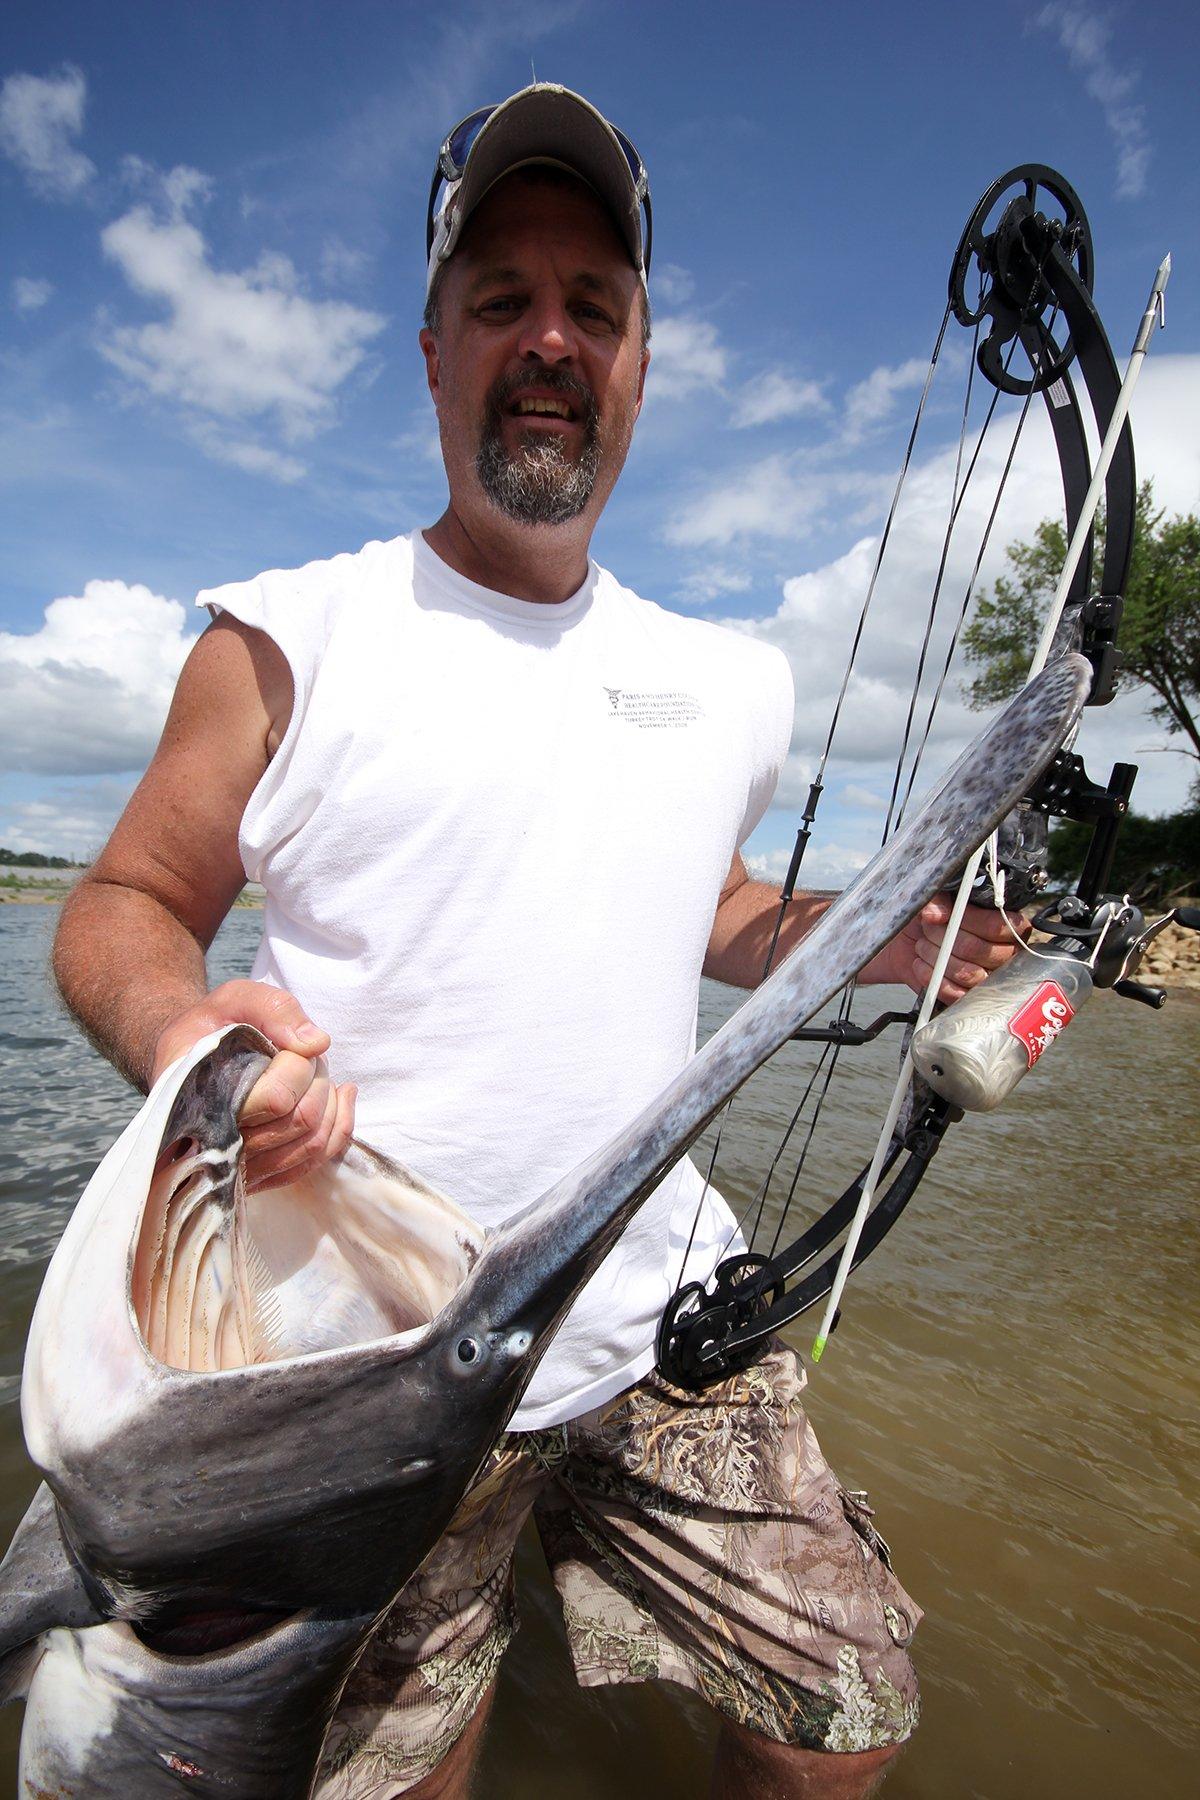 Some species, such as this paddlefish, make excellent table fare. Image by Will Brantley